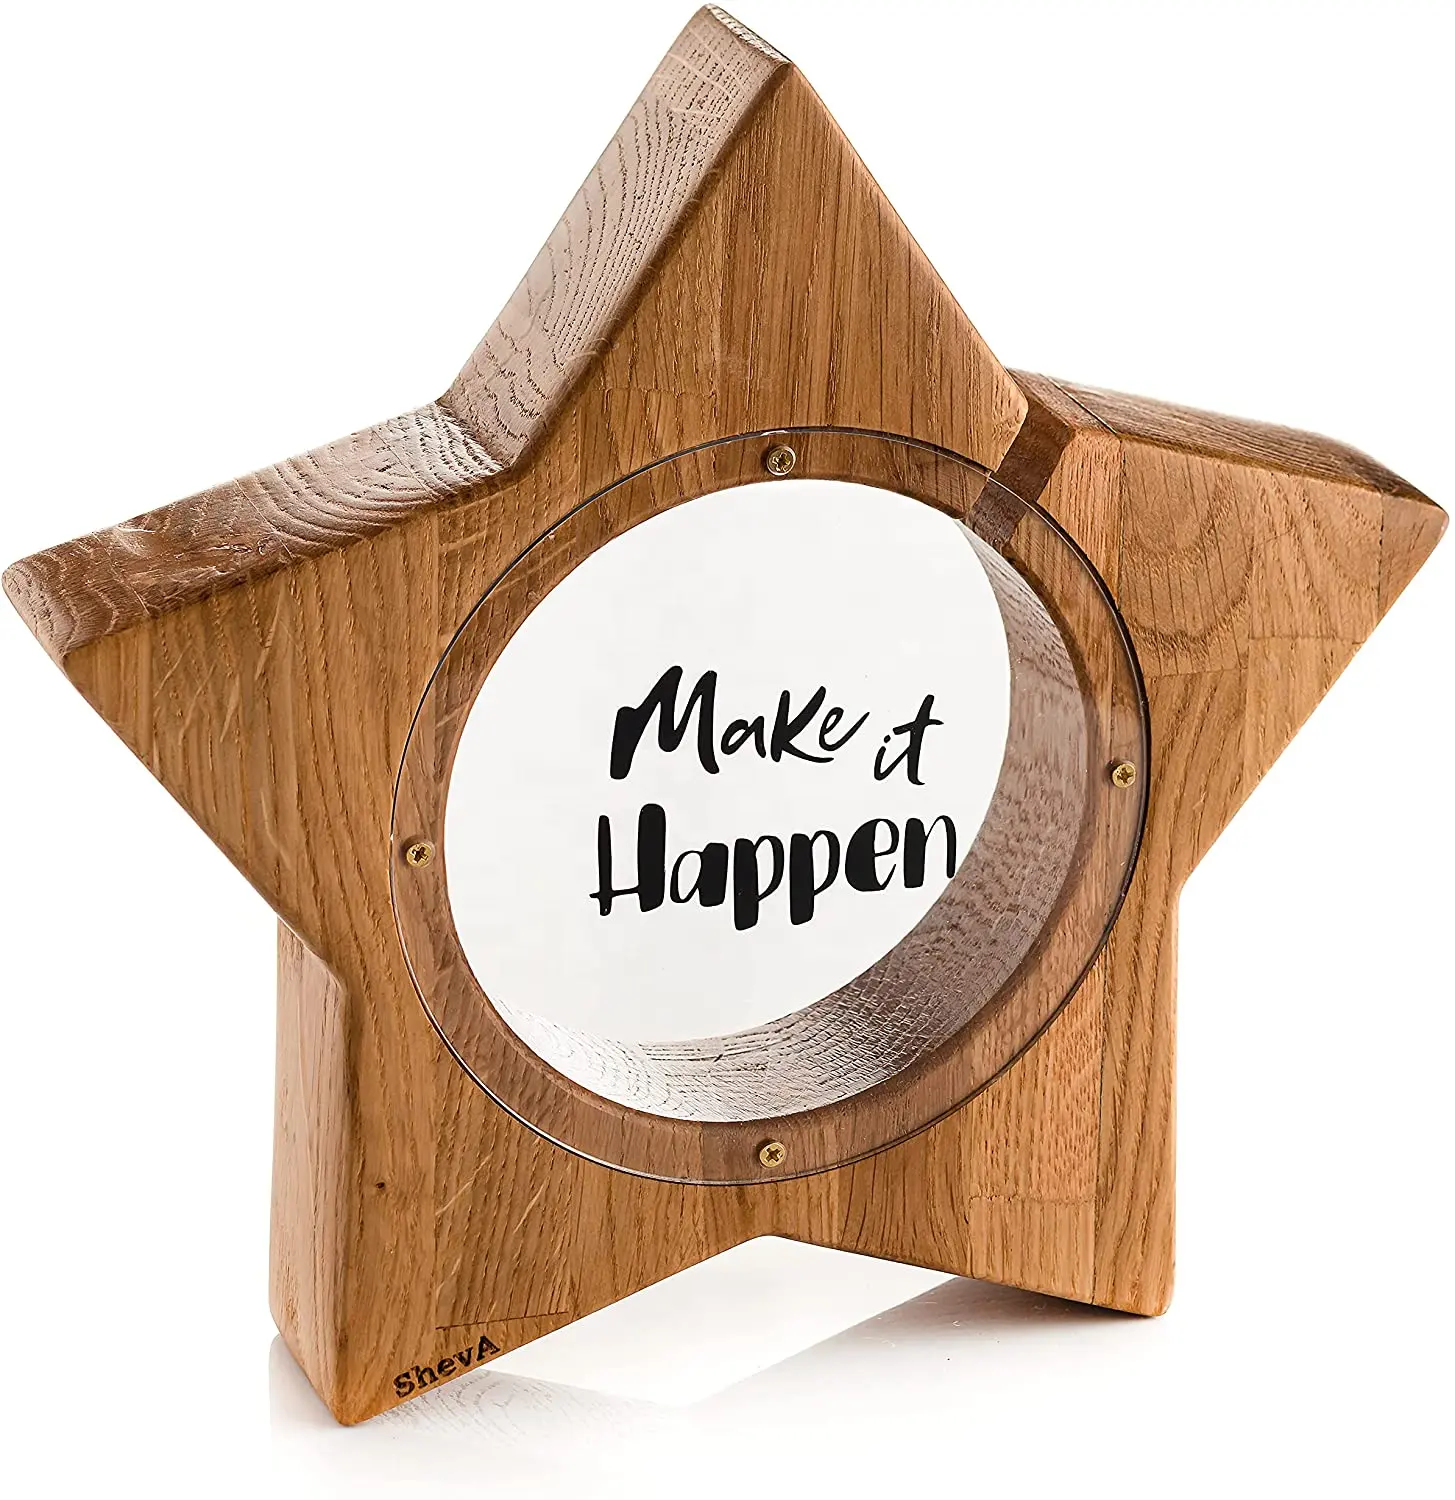 five-pointed star shaped cute wooden house saving money box piggy bank box for coin collection box kids money bank wooden